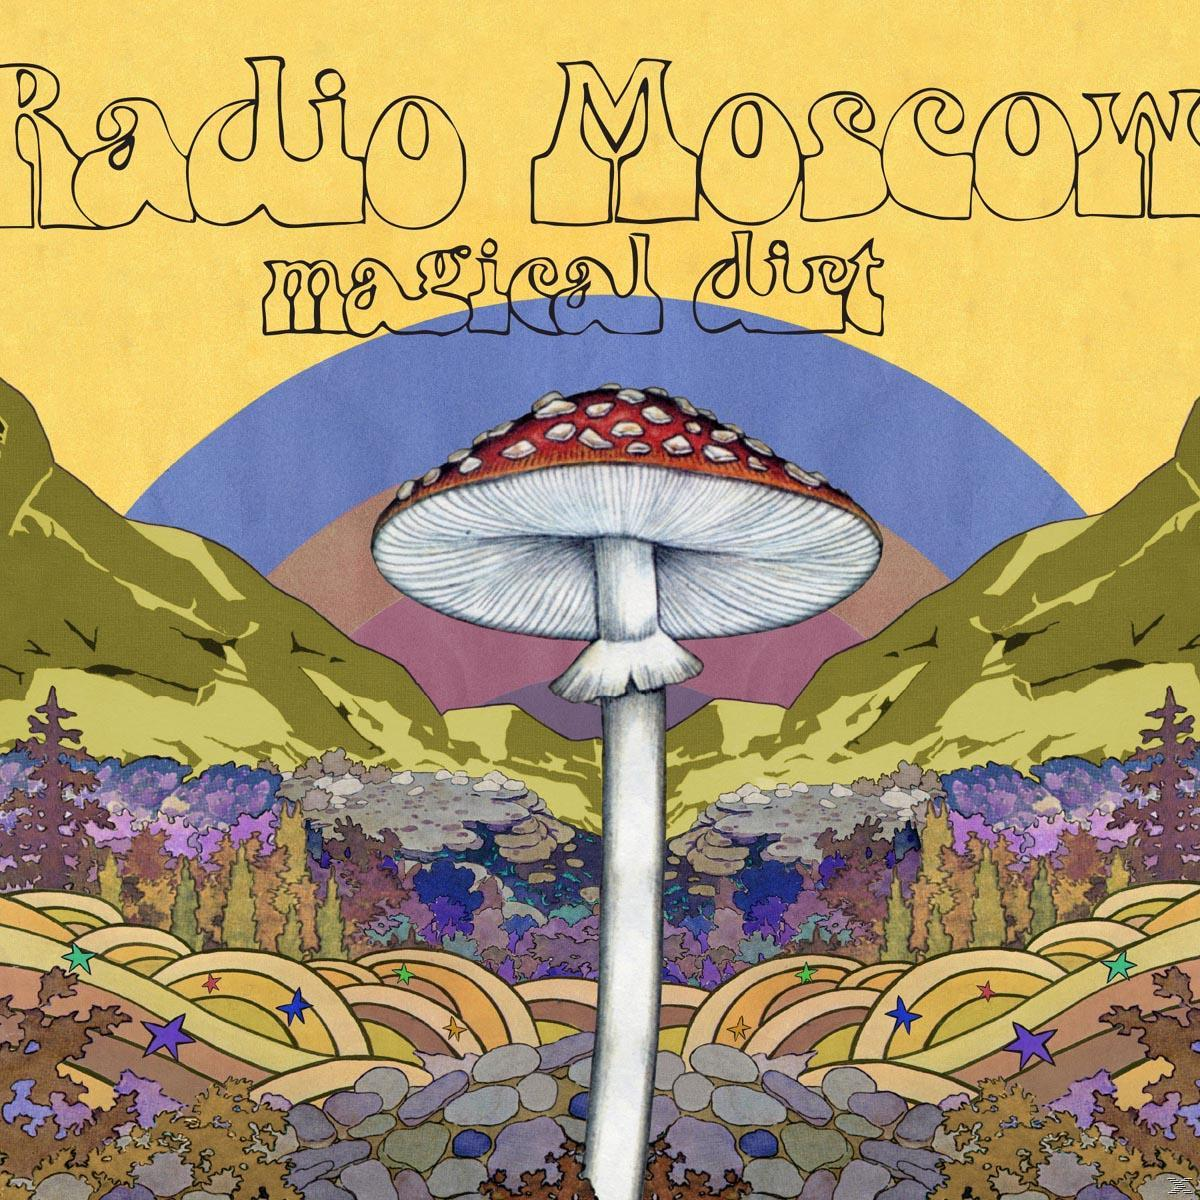 Radio Magical - (CD) - Dirt Moscow